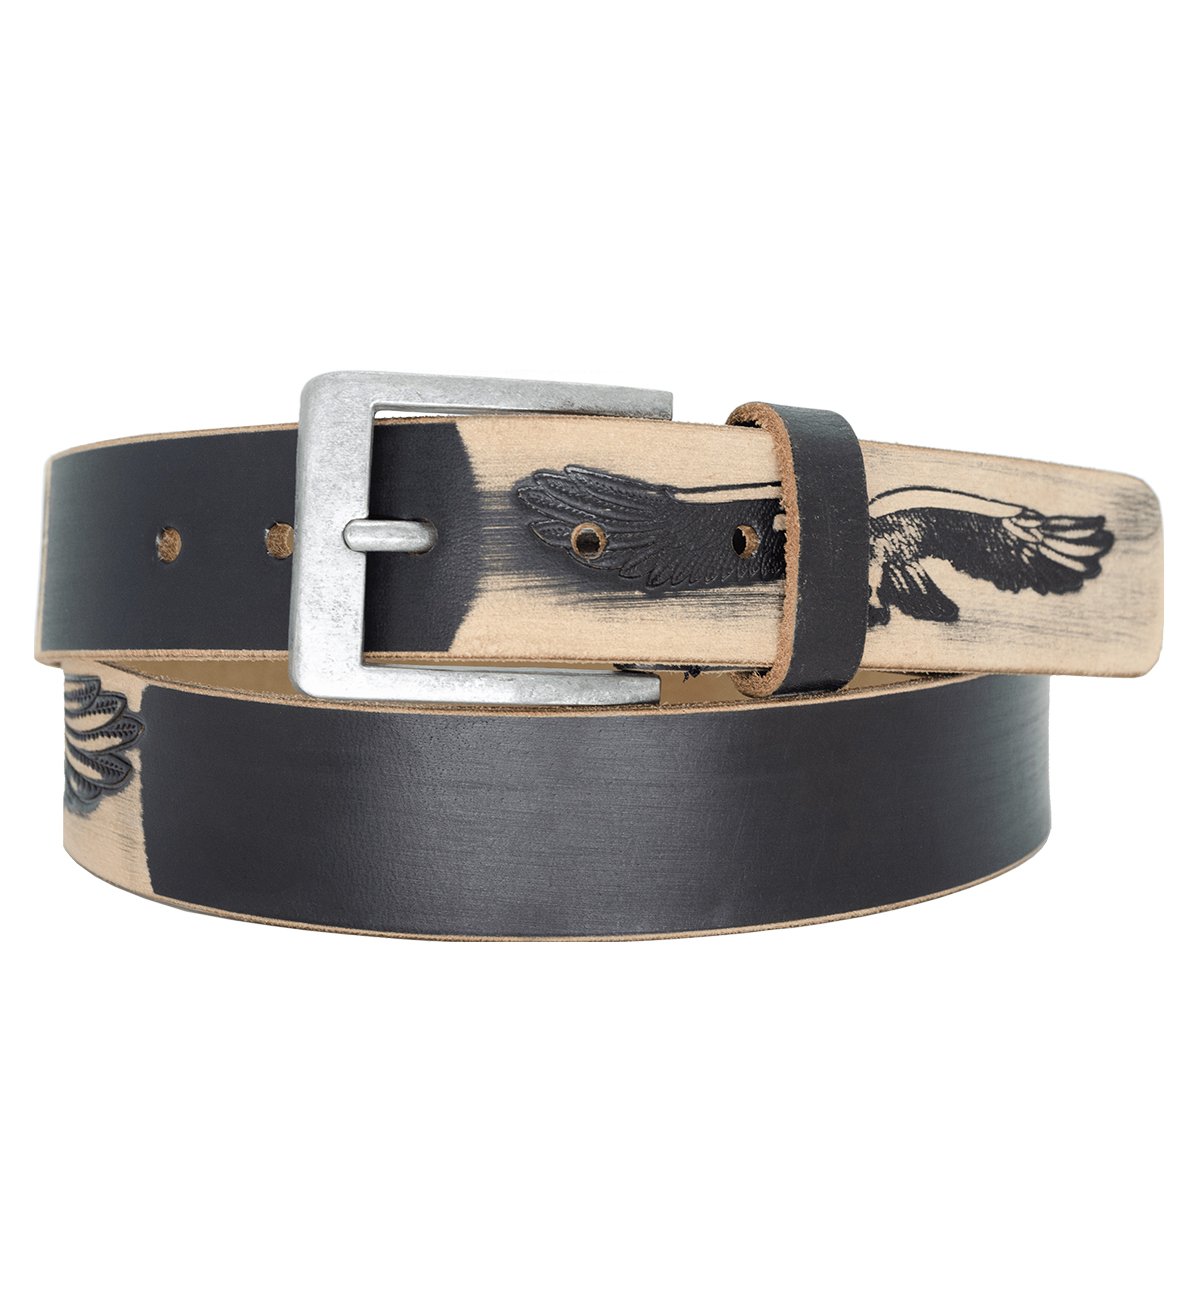 Men's Eagle Printed Casual Leather Belt with Heavy Antique Buckle - #BT-1623